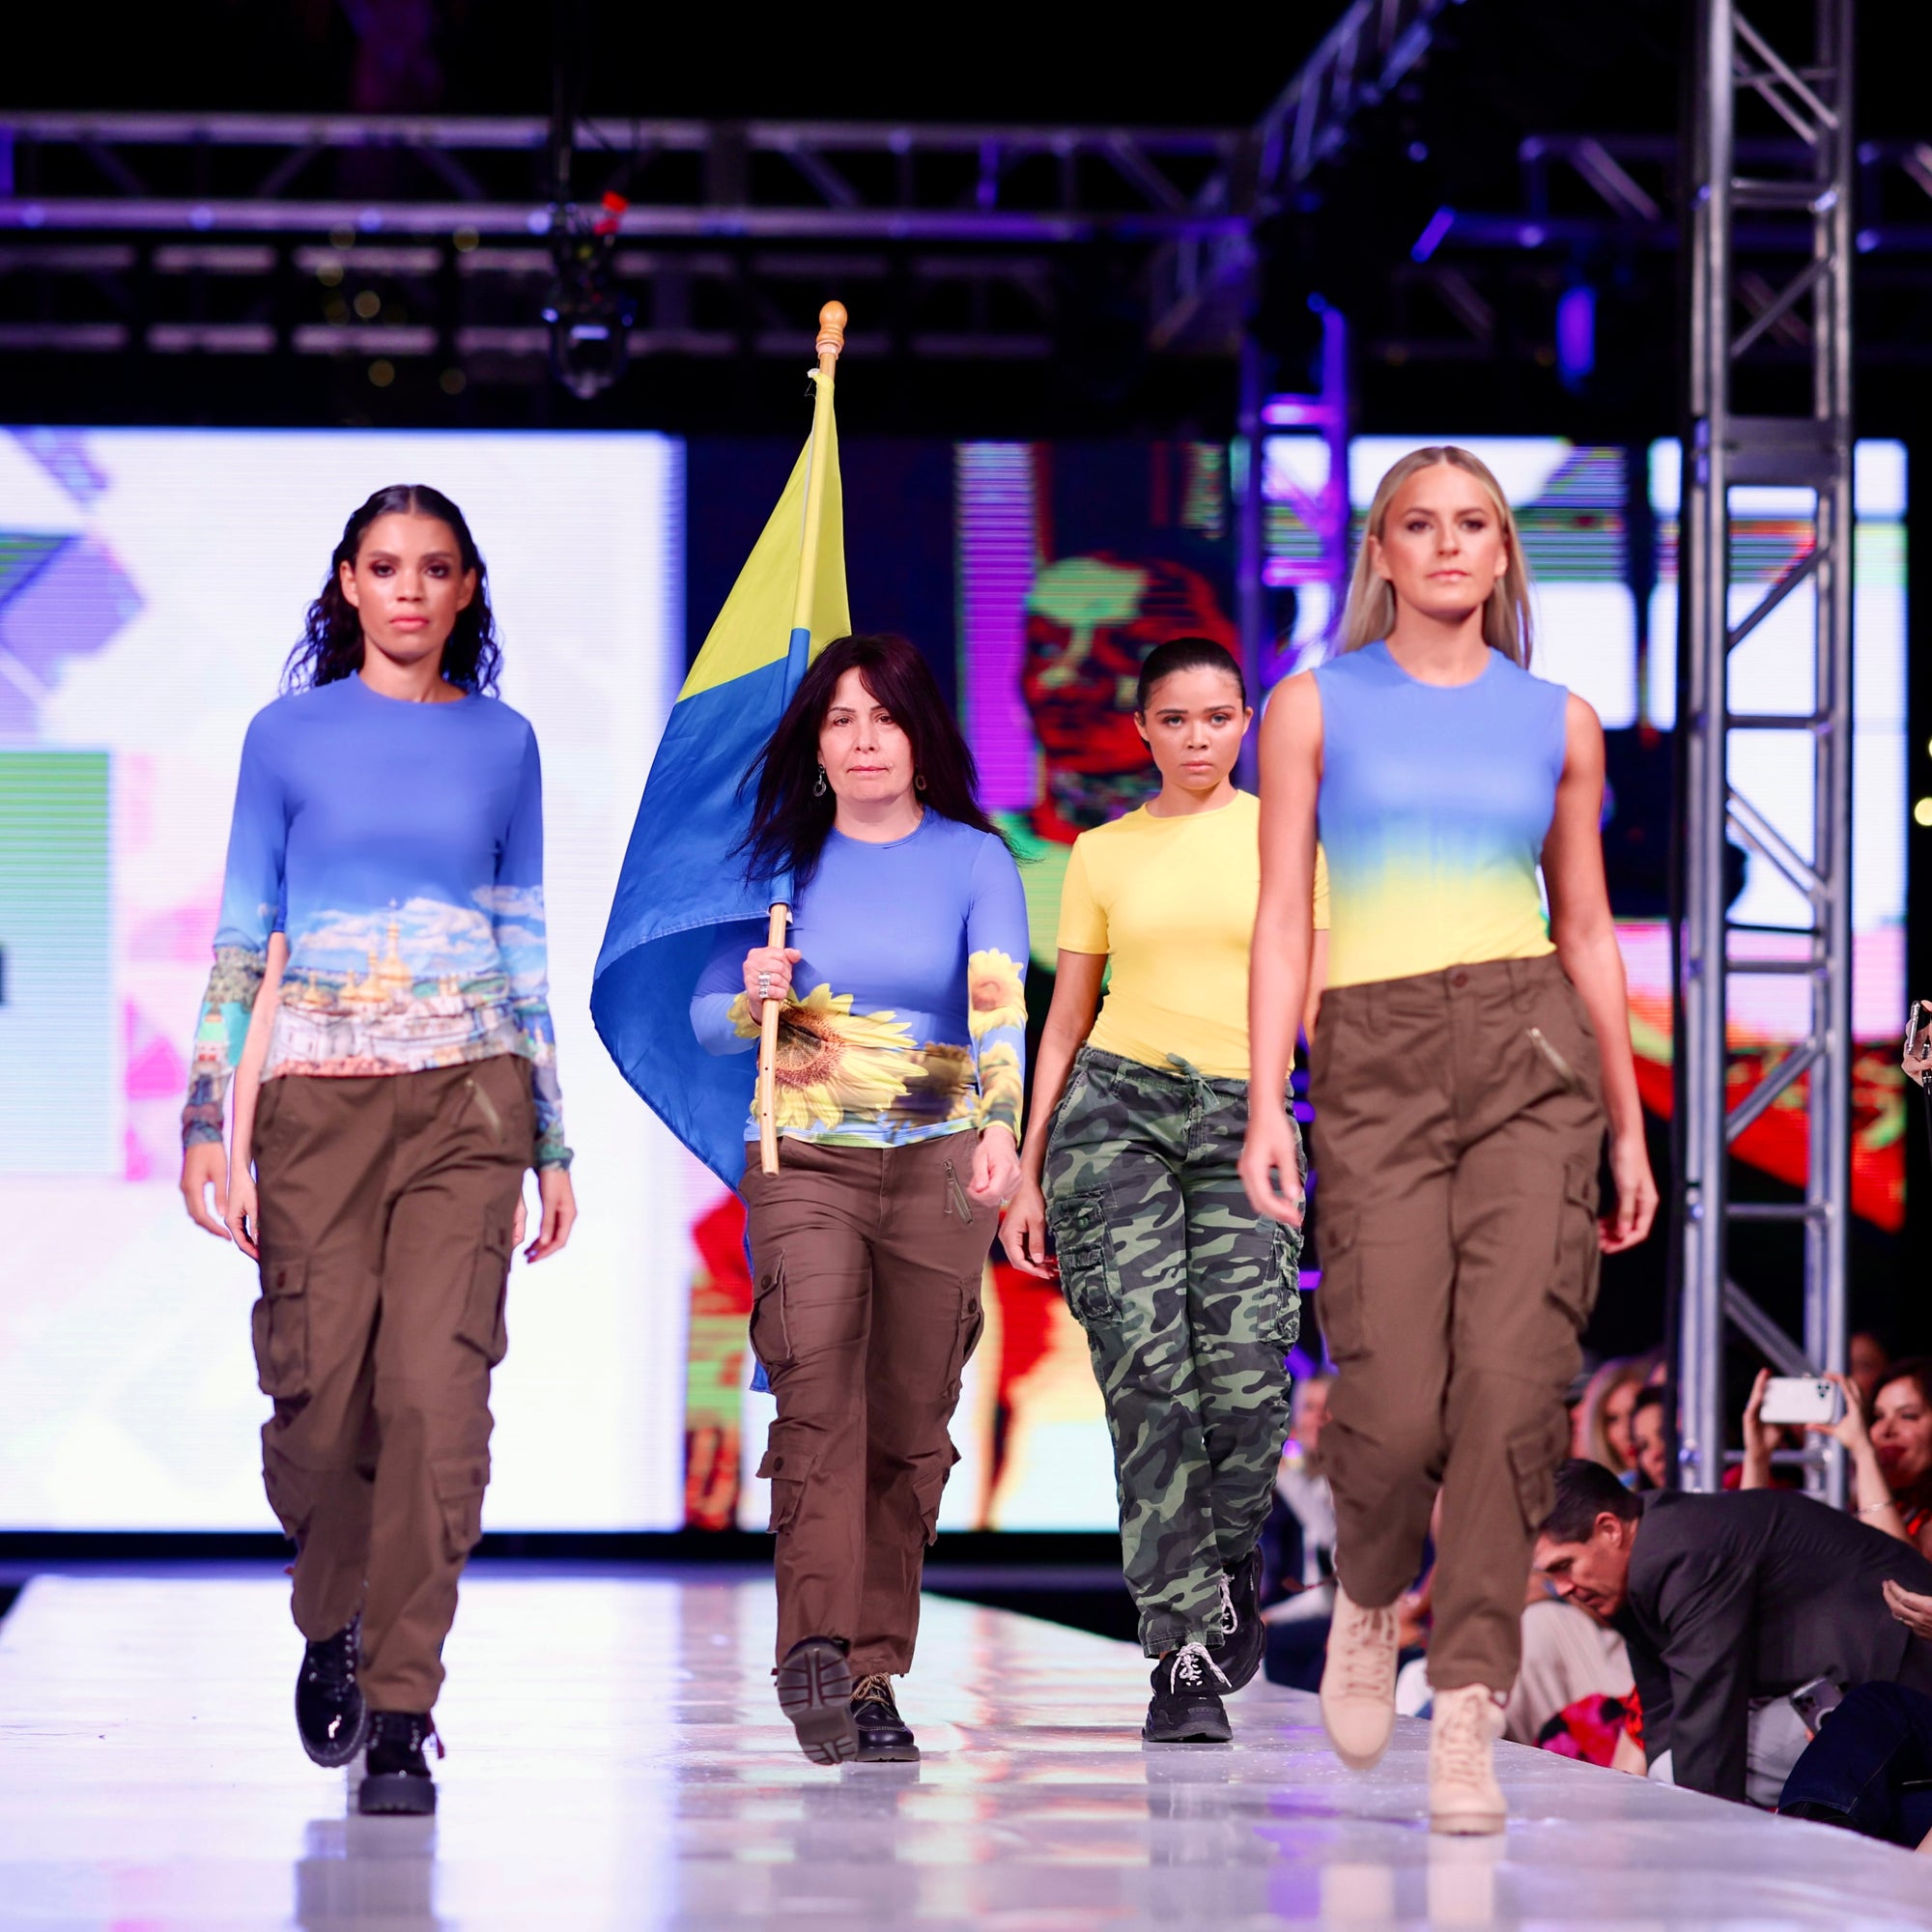 On the runway at Phoenix Fashion Week April 2022.  Adea has created a collection honoring Ukraine.  $25 from every top sold is donated to USA for UNHCR.  Designs include the national sunflower, the Kyiv Pechersk Lavra and the colors of the flag. 